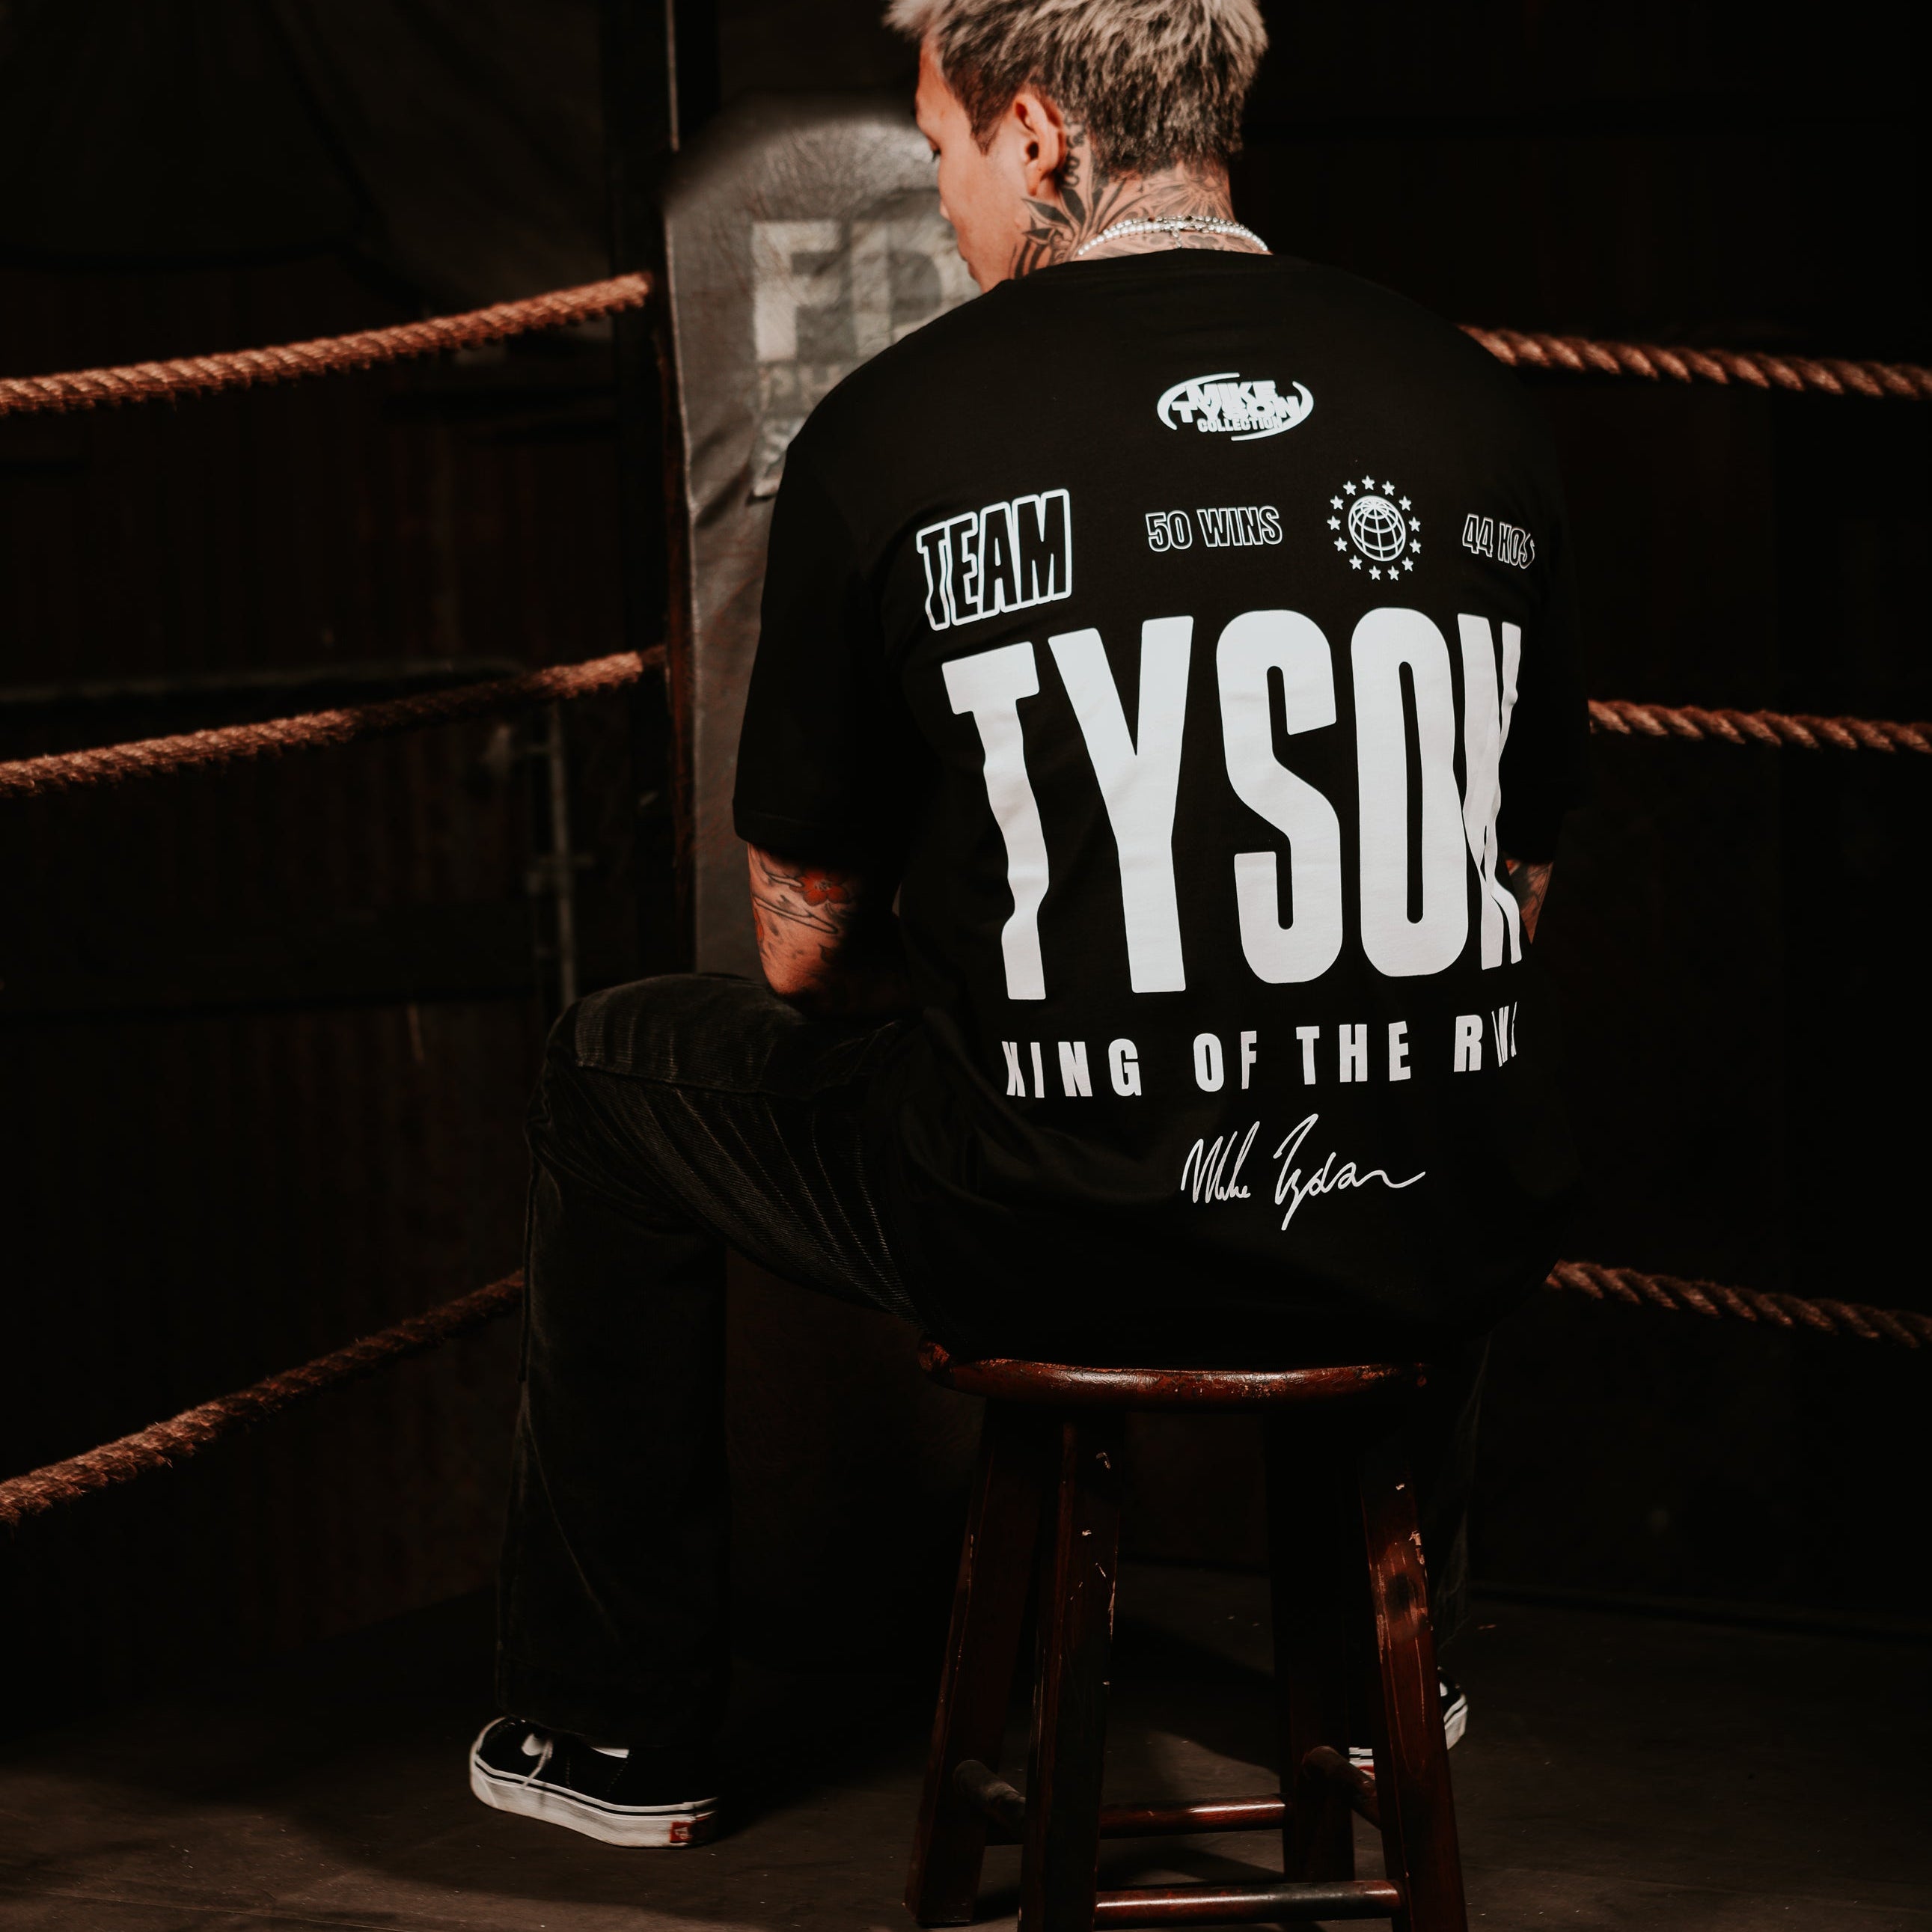 Mike Tyson Collection: Team Tyson - MT Collection